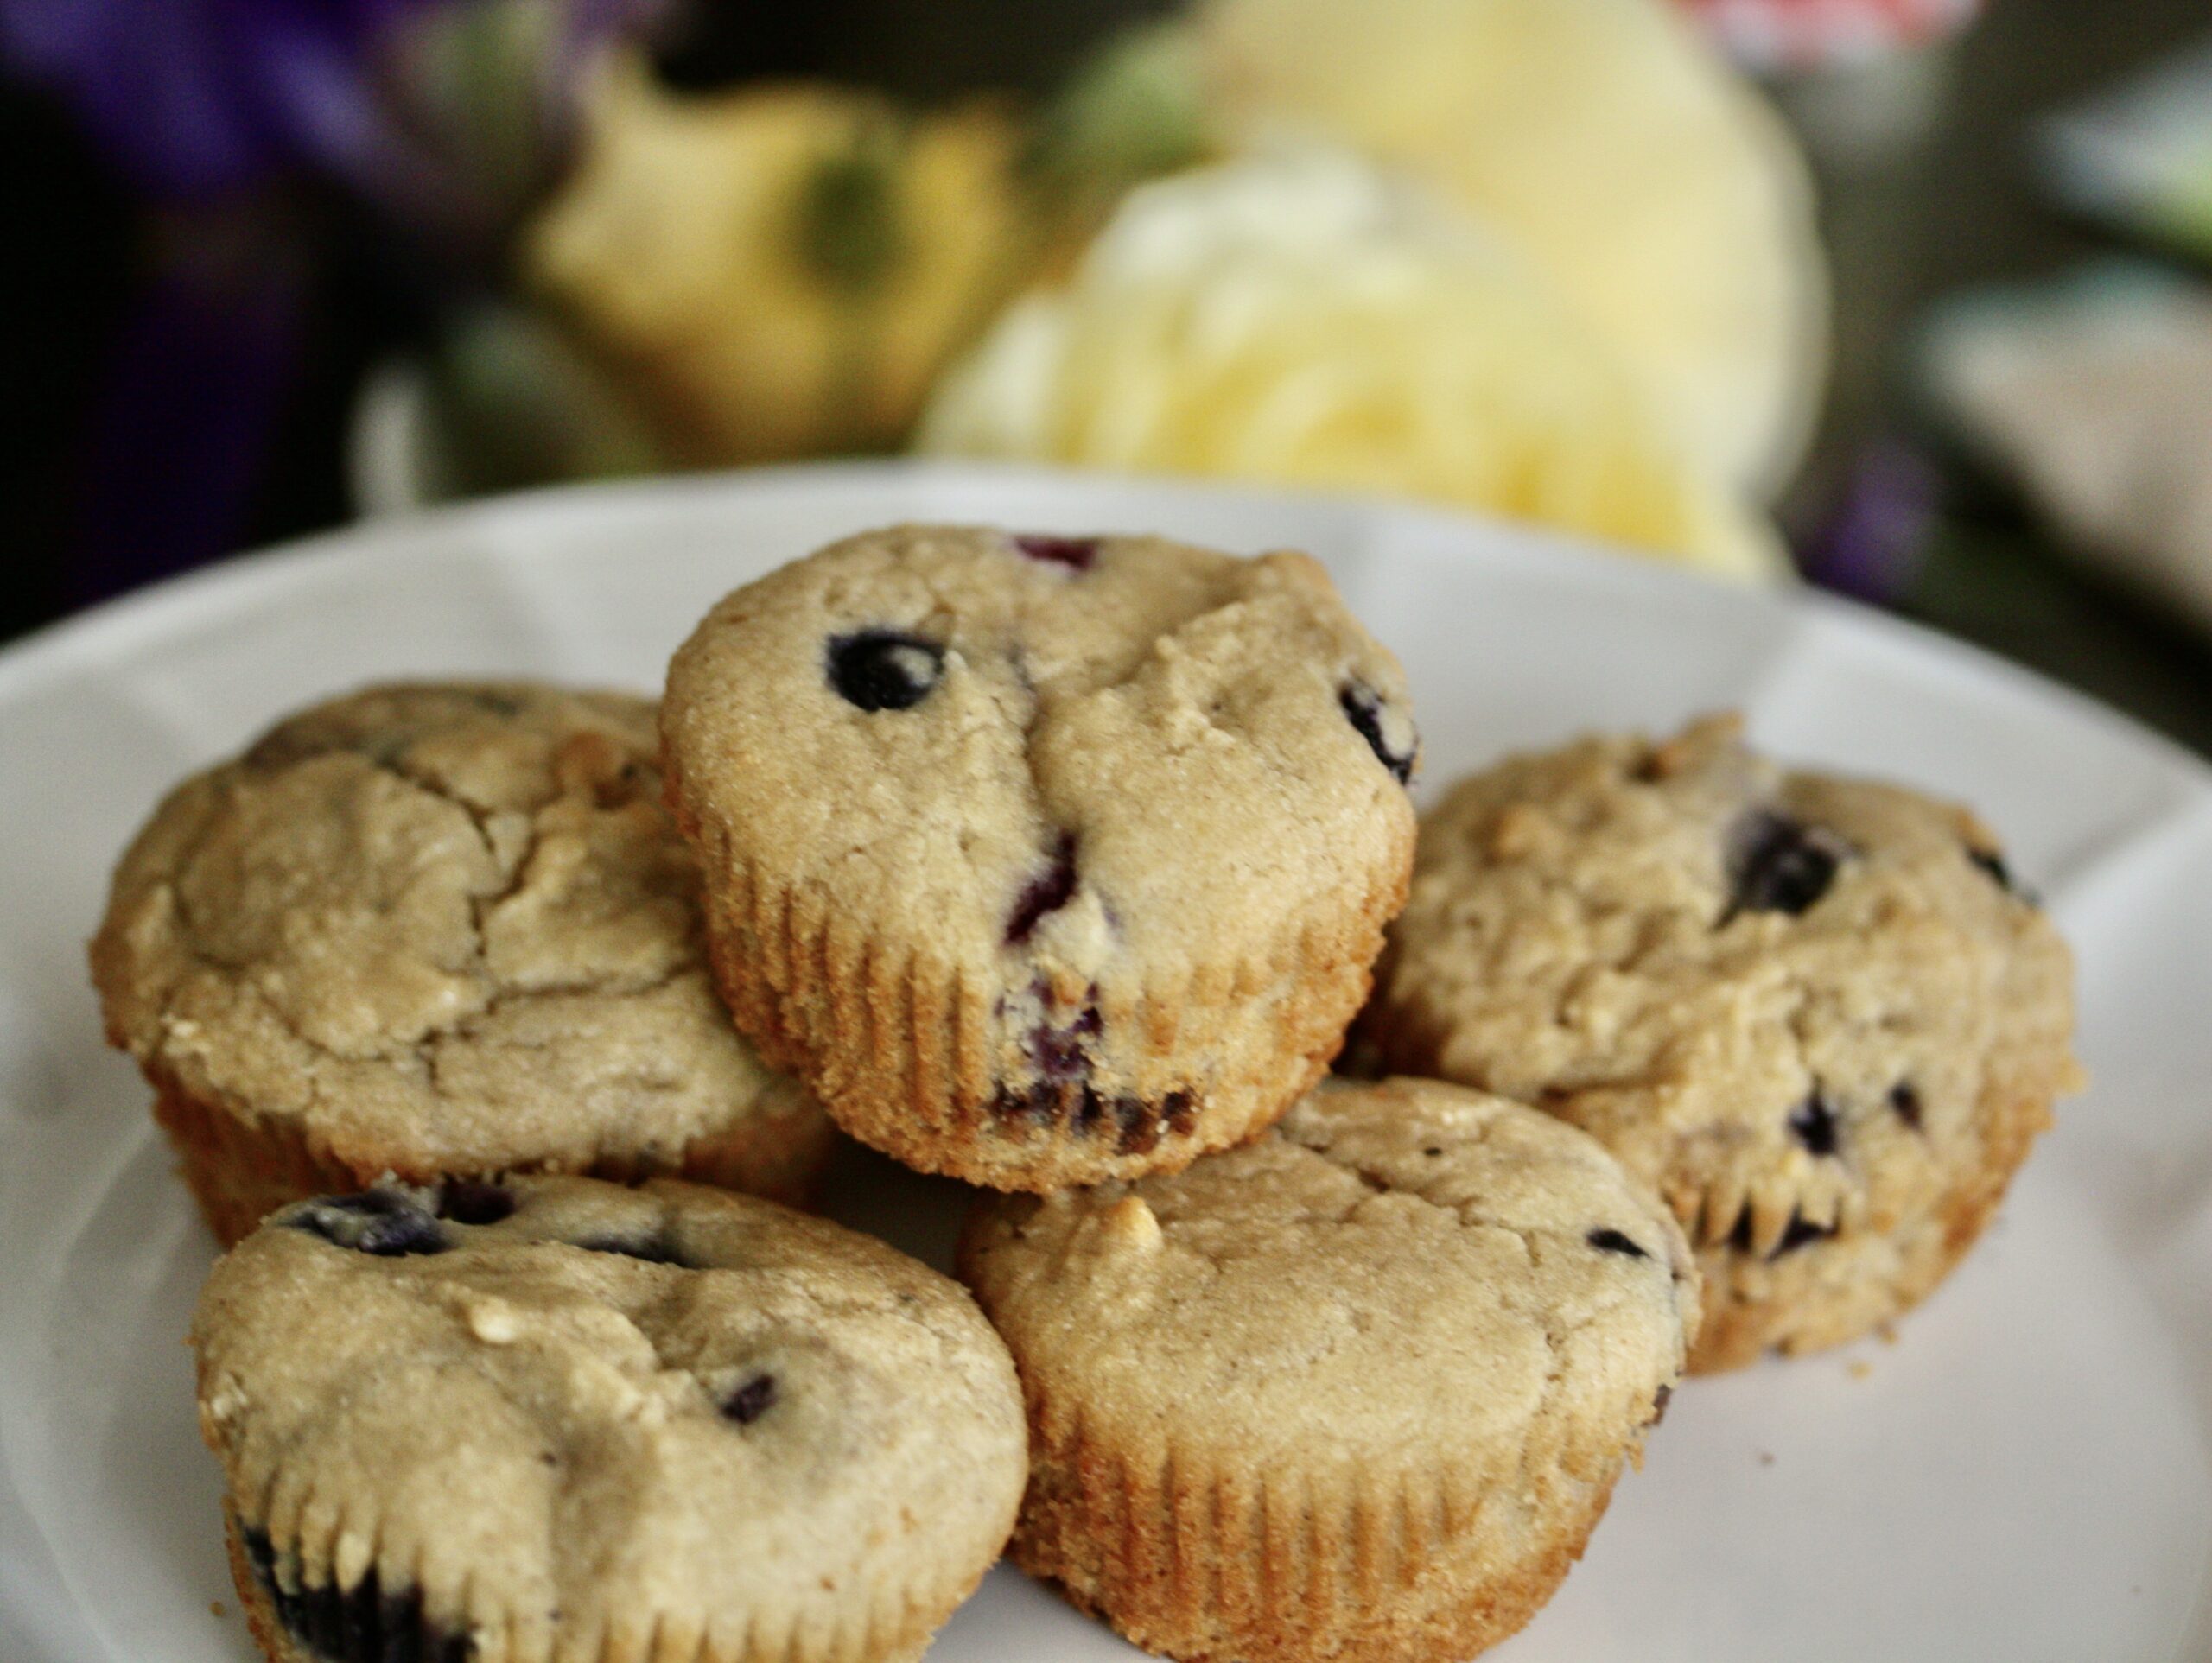 A plate of gluten-free blueberry muffins.